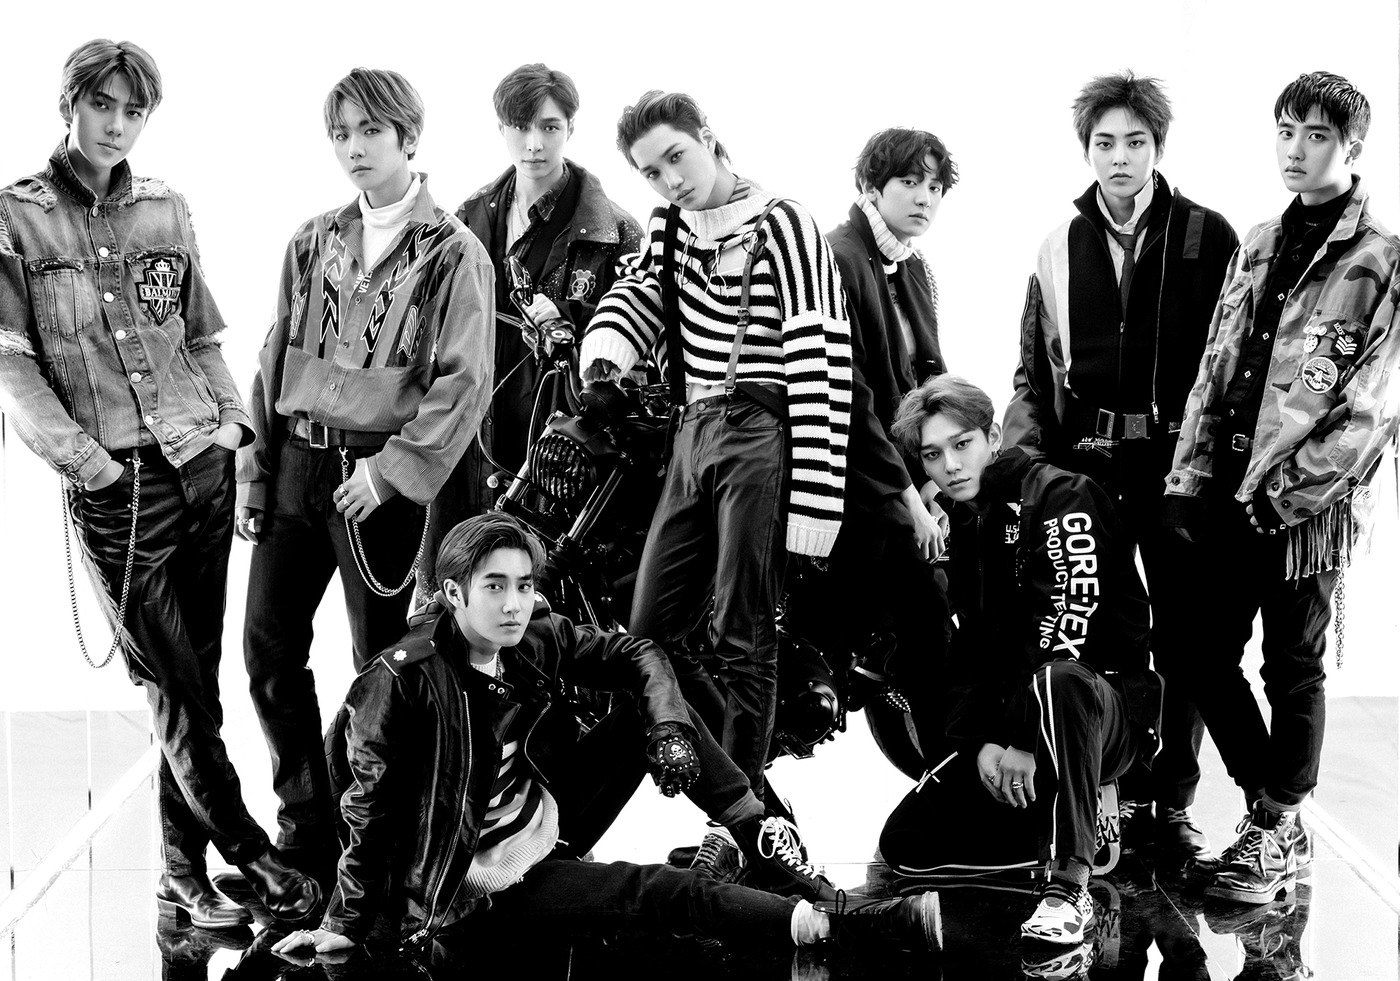 ...Power proofEXOs regular 5th album DONT MESS UP MY TEMPO (Dont Mess Up My Tempo), released on the last 2 days, was released on the 8th, the first place on the albums comprehensive chart for the first week of November.Im on.In addition, this album is the first place on various music charts such as Hanter chart, Shinnara record, Hottax, Kyobo Book CentreIn addition to winning the title, iTunes Comprehensive Album Chart is the first place in 47 regions around the world, Chinas Shami Music Comprehensive Chart First placeHas proved the global popularity of EXO by recording.This album has 11 songs of various genres including the title song Tempo (Tempo), which shows EXOs intense charm and Powerful performance, and is receiving the hot love of music fans.On the other hand, EXO will continue its activities on the music program such as KBS 2TV Music Bank on the 9th, MBC Show! Music center on the 10th, and SBS popular song on the 11th.